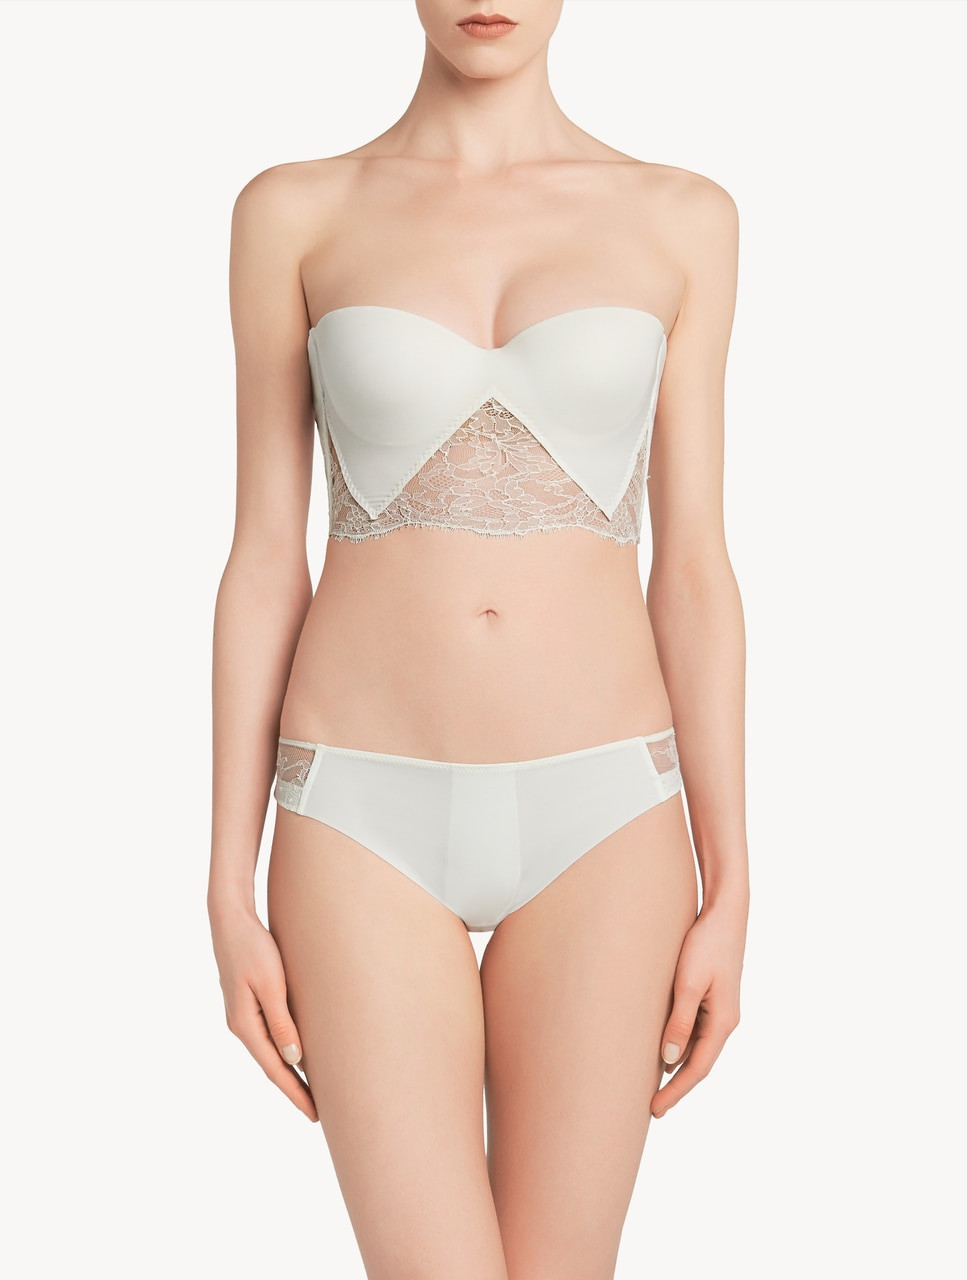 White Lycra strapless brassiere with Chantilly lace